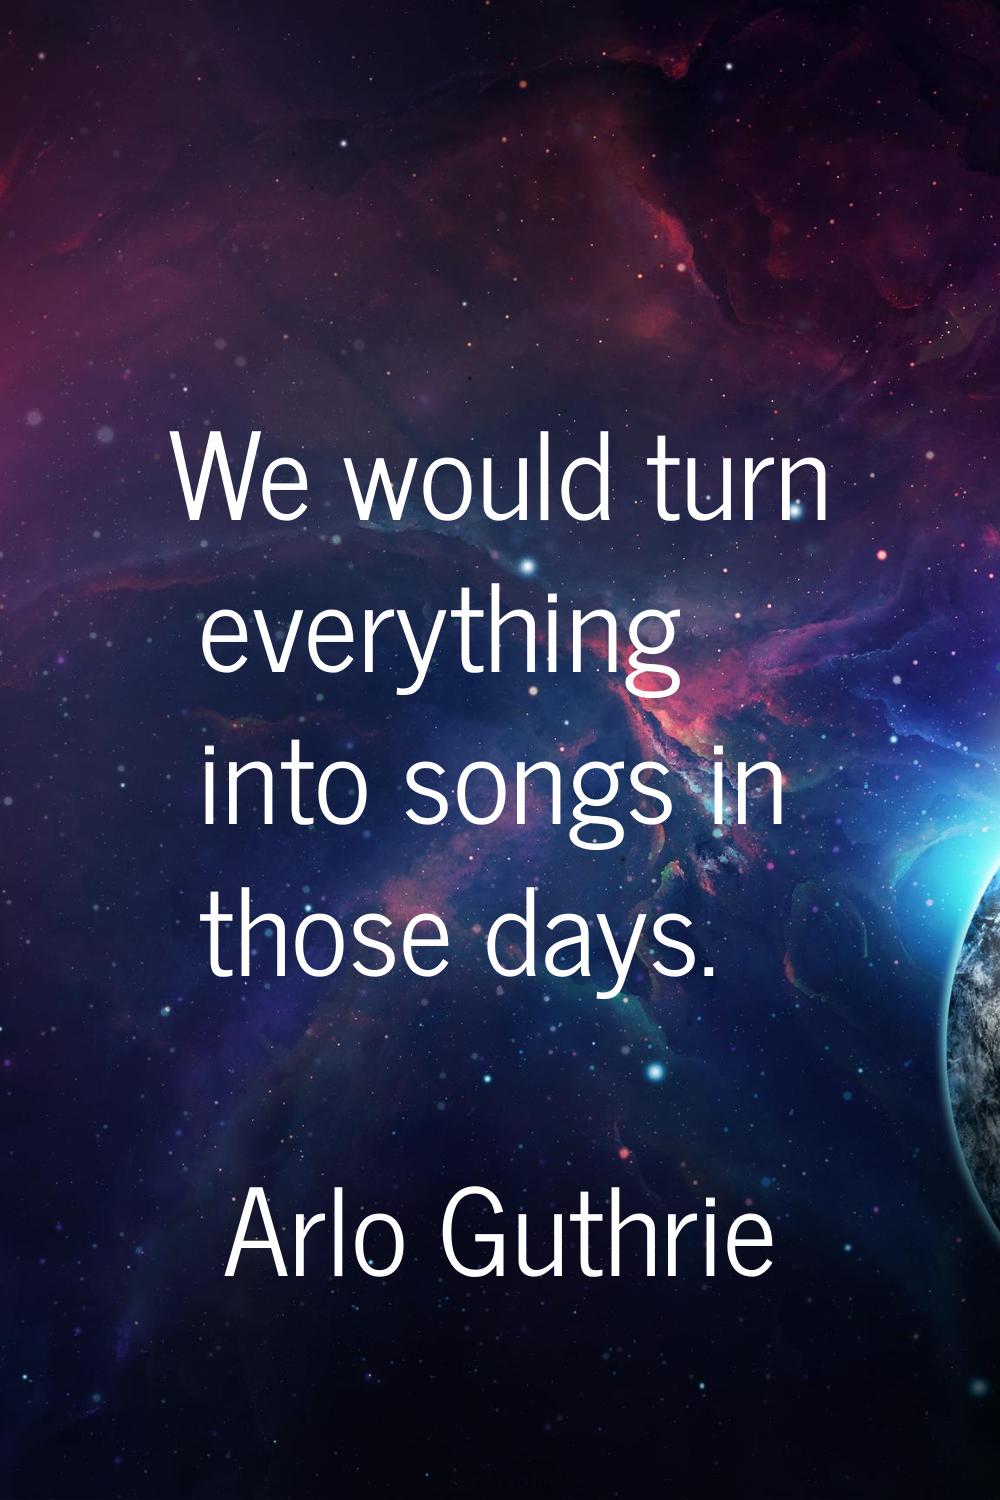 We would turn everything into songs in those days.